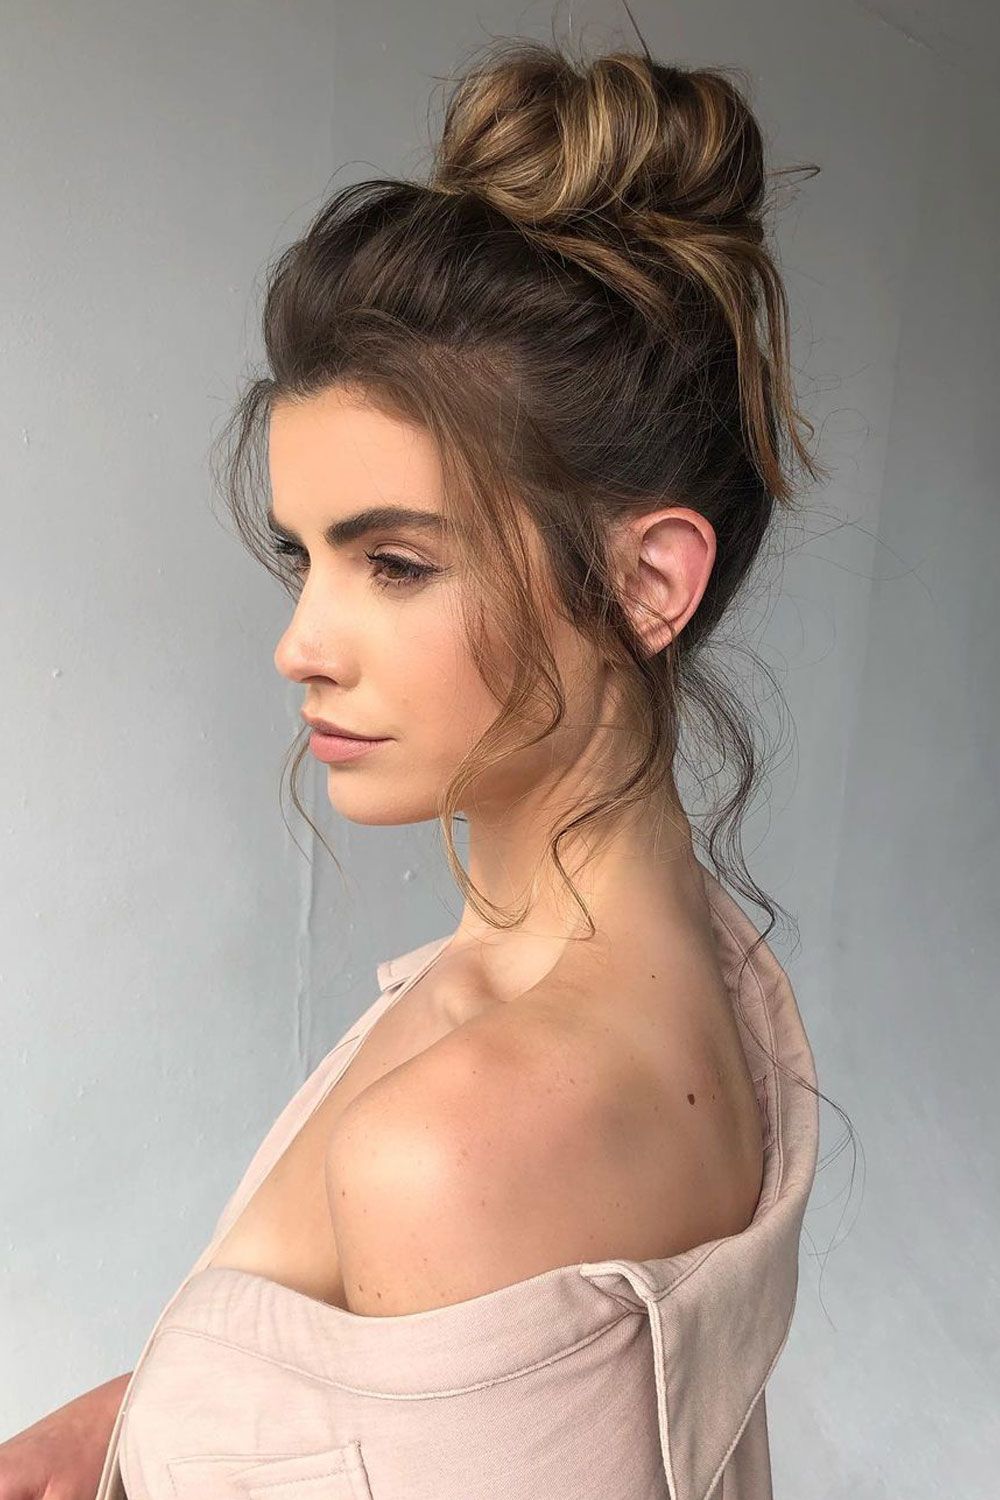 90s Inspired Updo With A Lot Of Volume